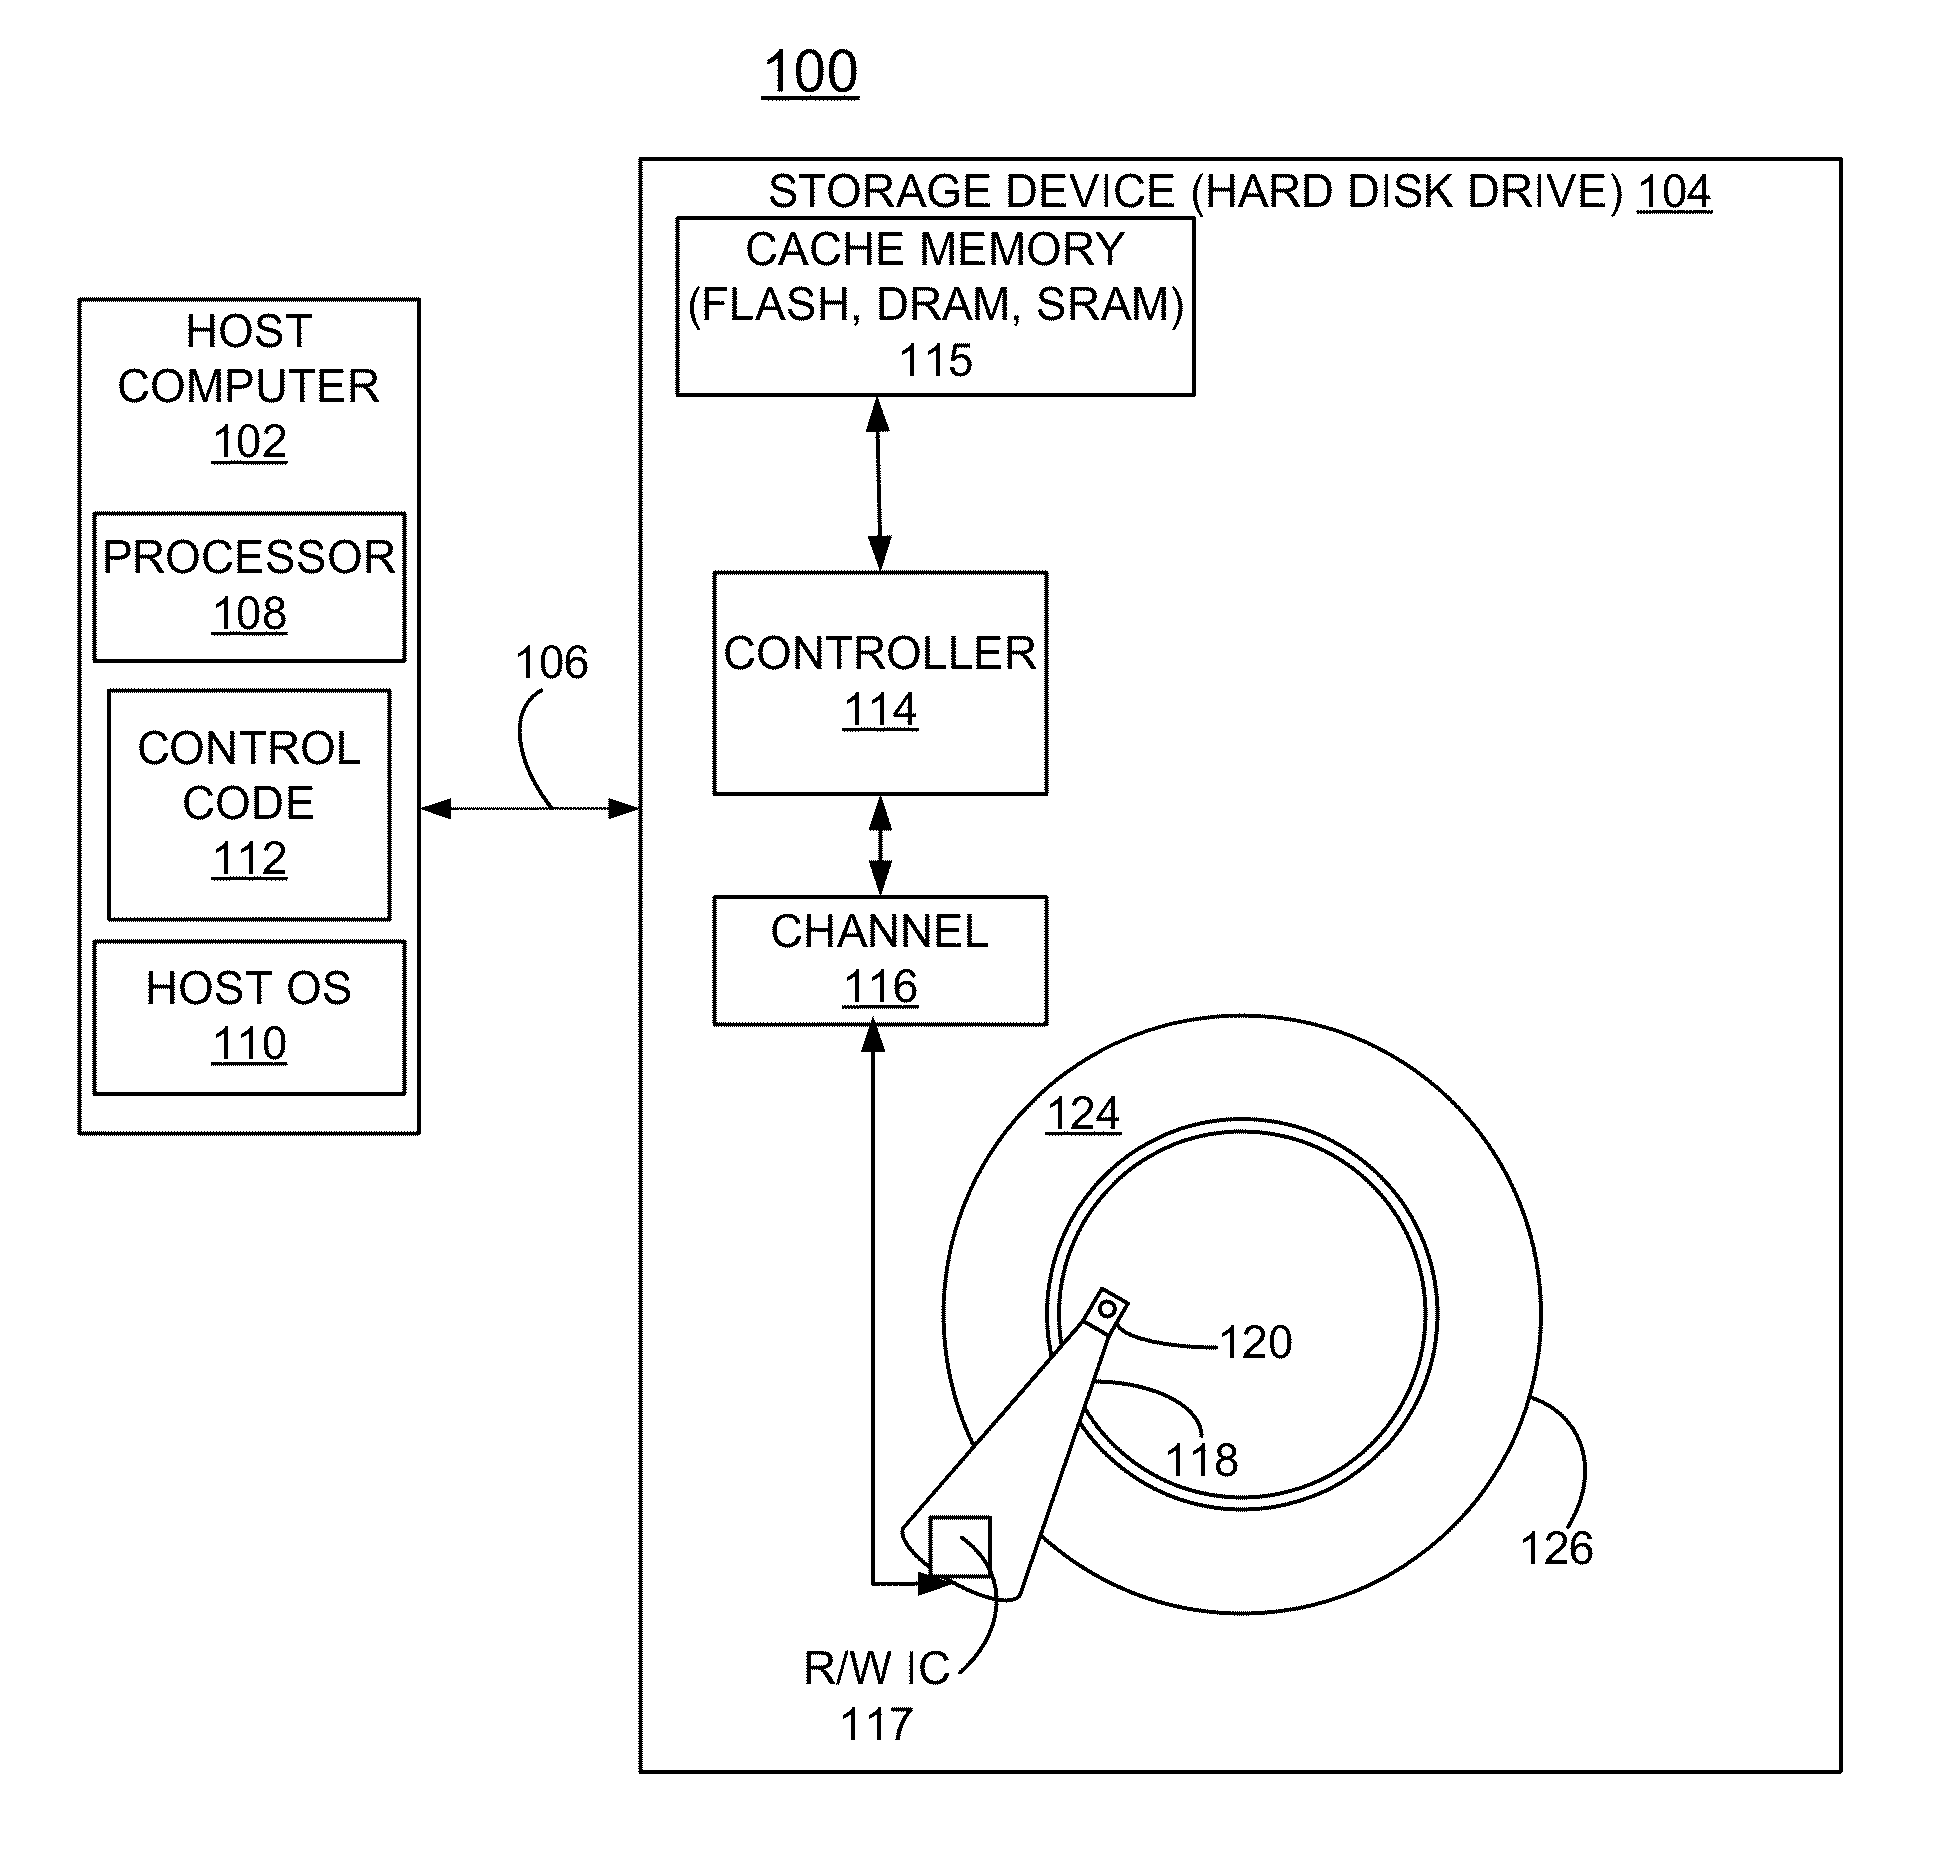 Implementing asymmetric degauss control for write head for hard disk drives